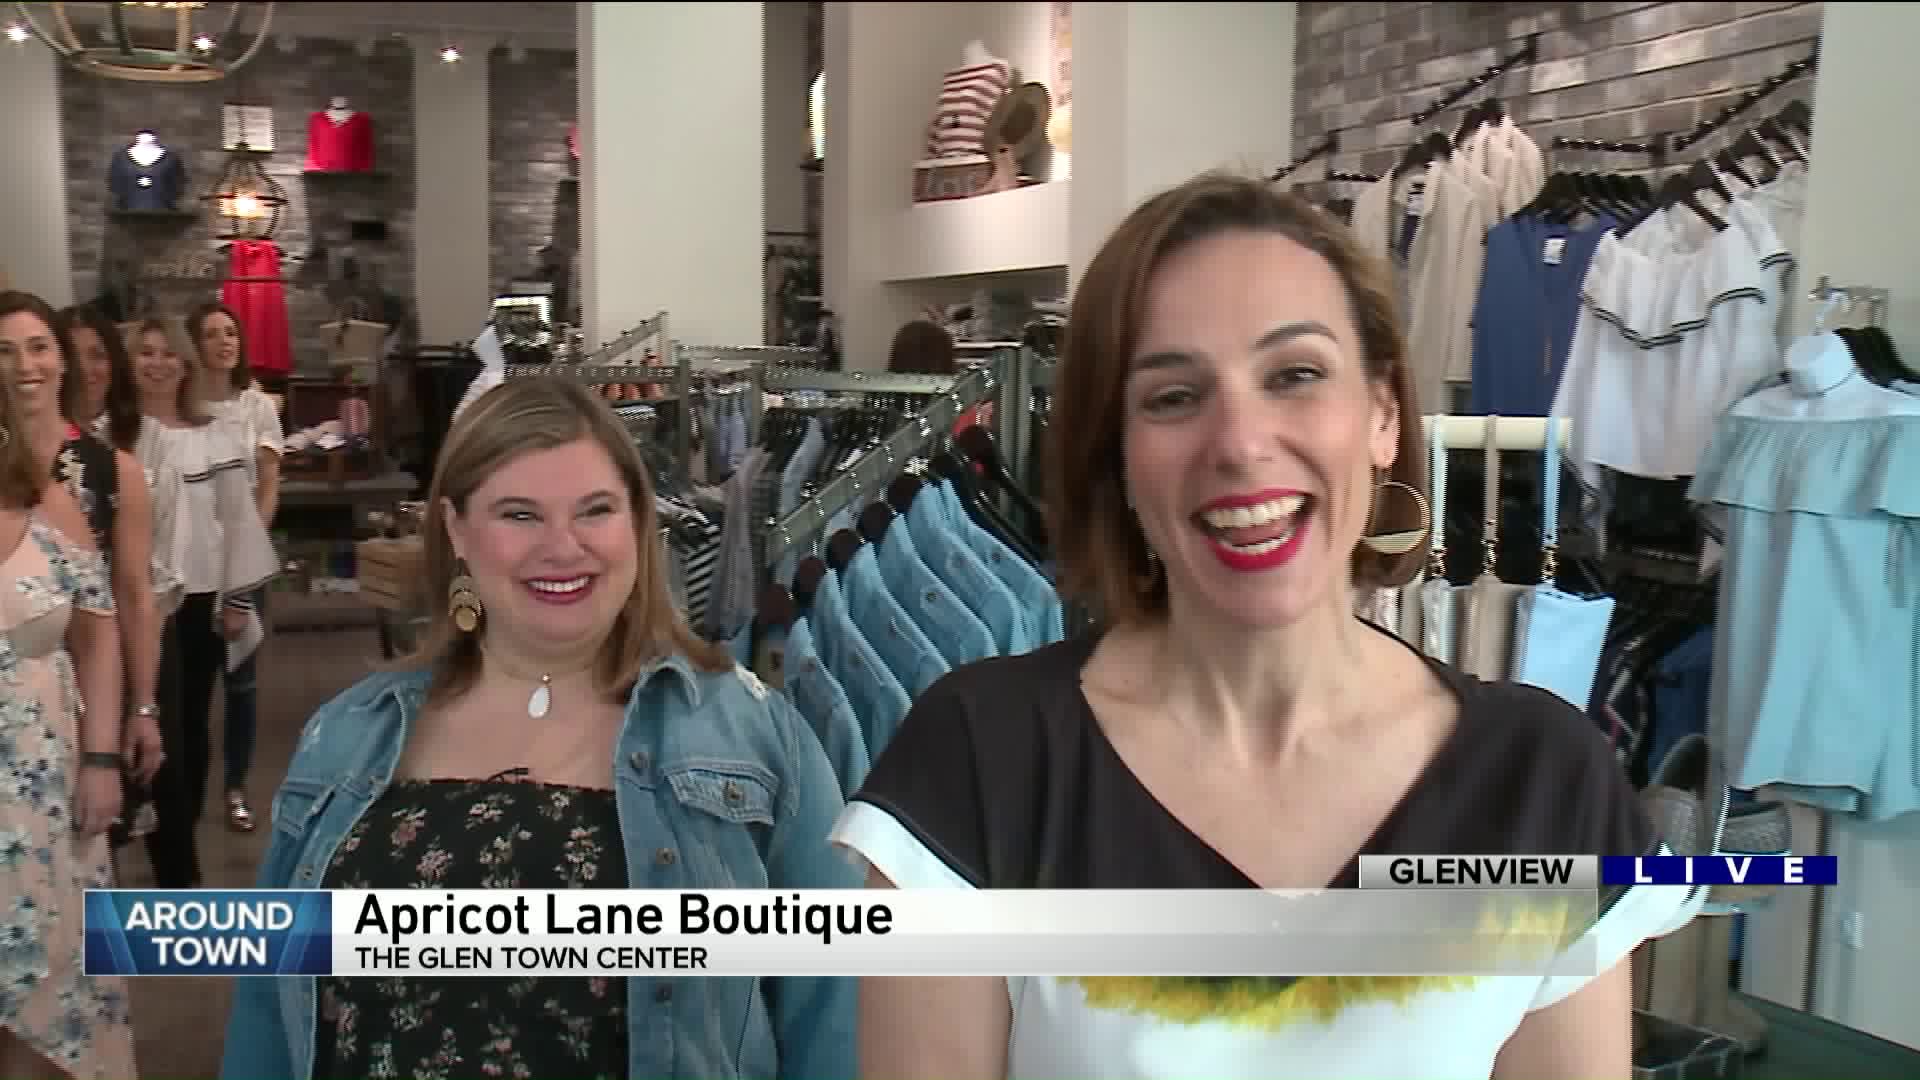 Around Town checks out Spring fashion trends at Apricot Lane Boutique